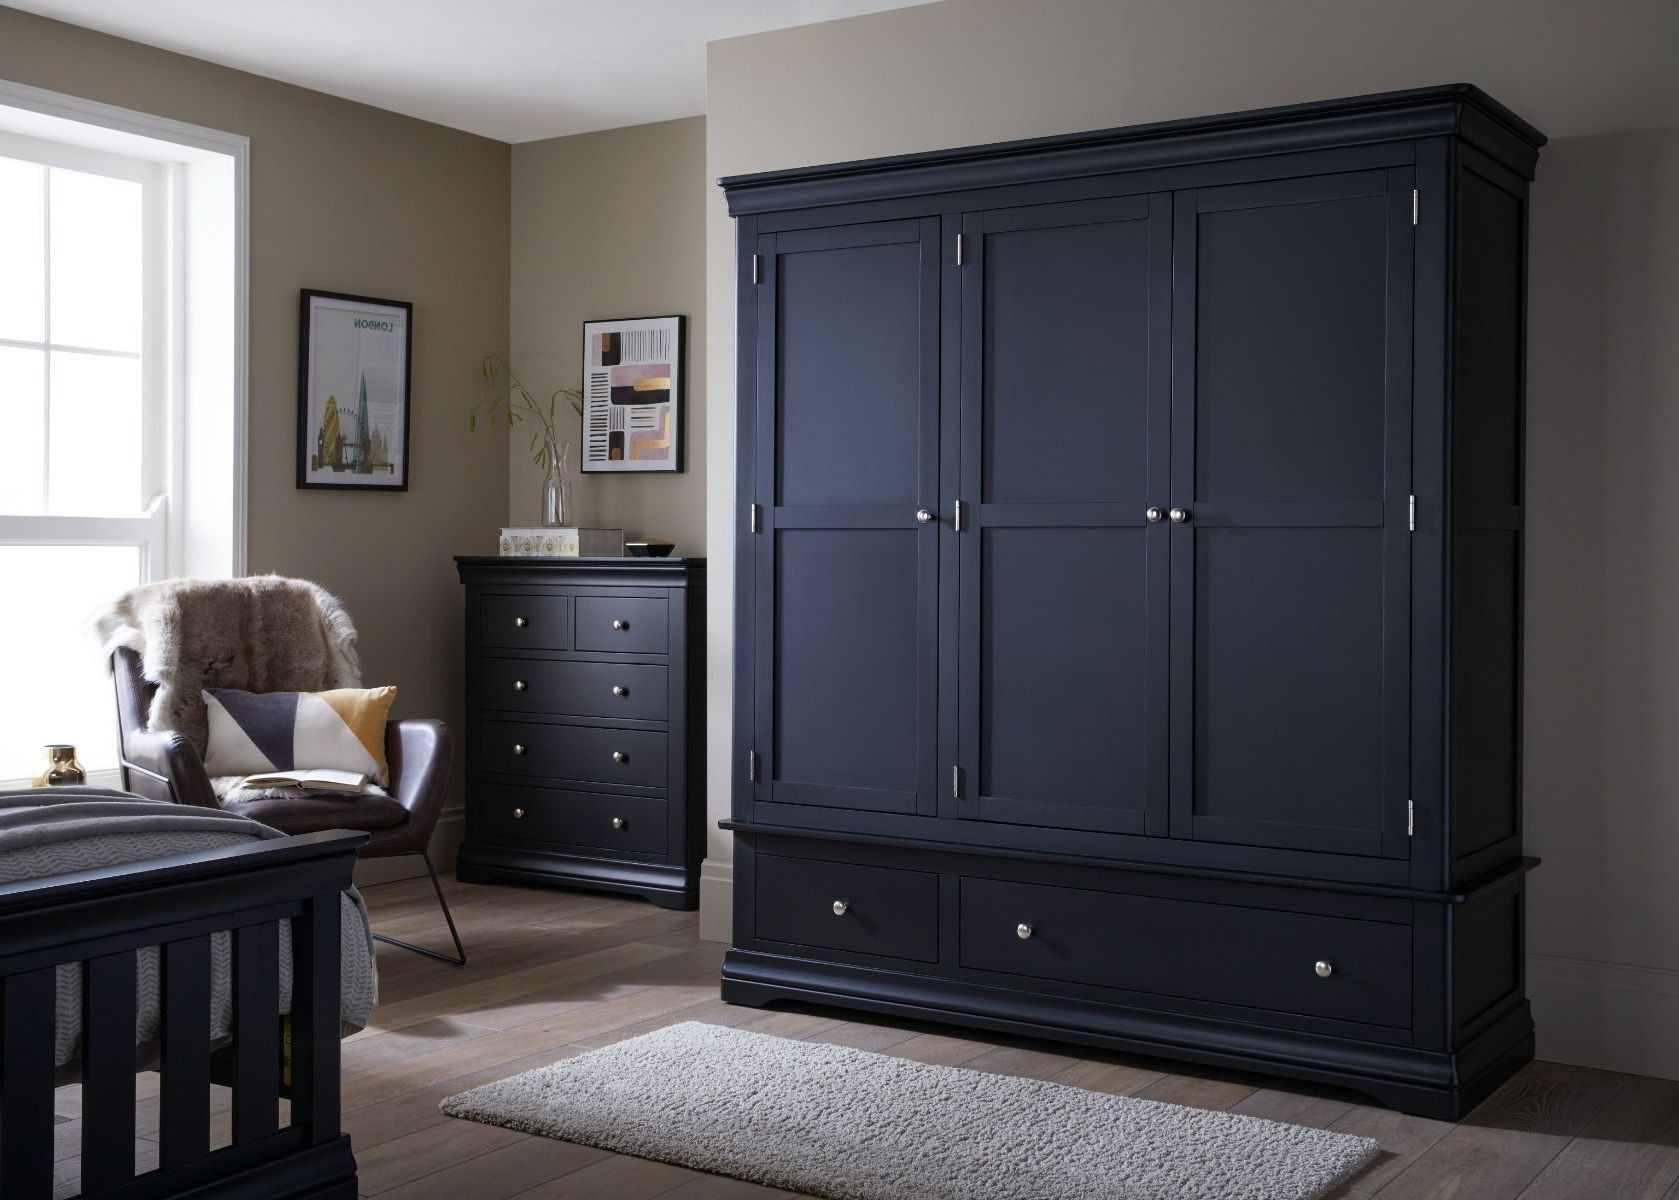 Toulouse Black Painted Large Triple Wardrobe With Drawer Throughout Cheap Wardrobes With Drawers (Gallery 13 of 20)